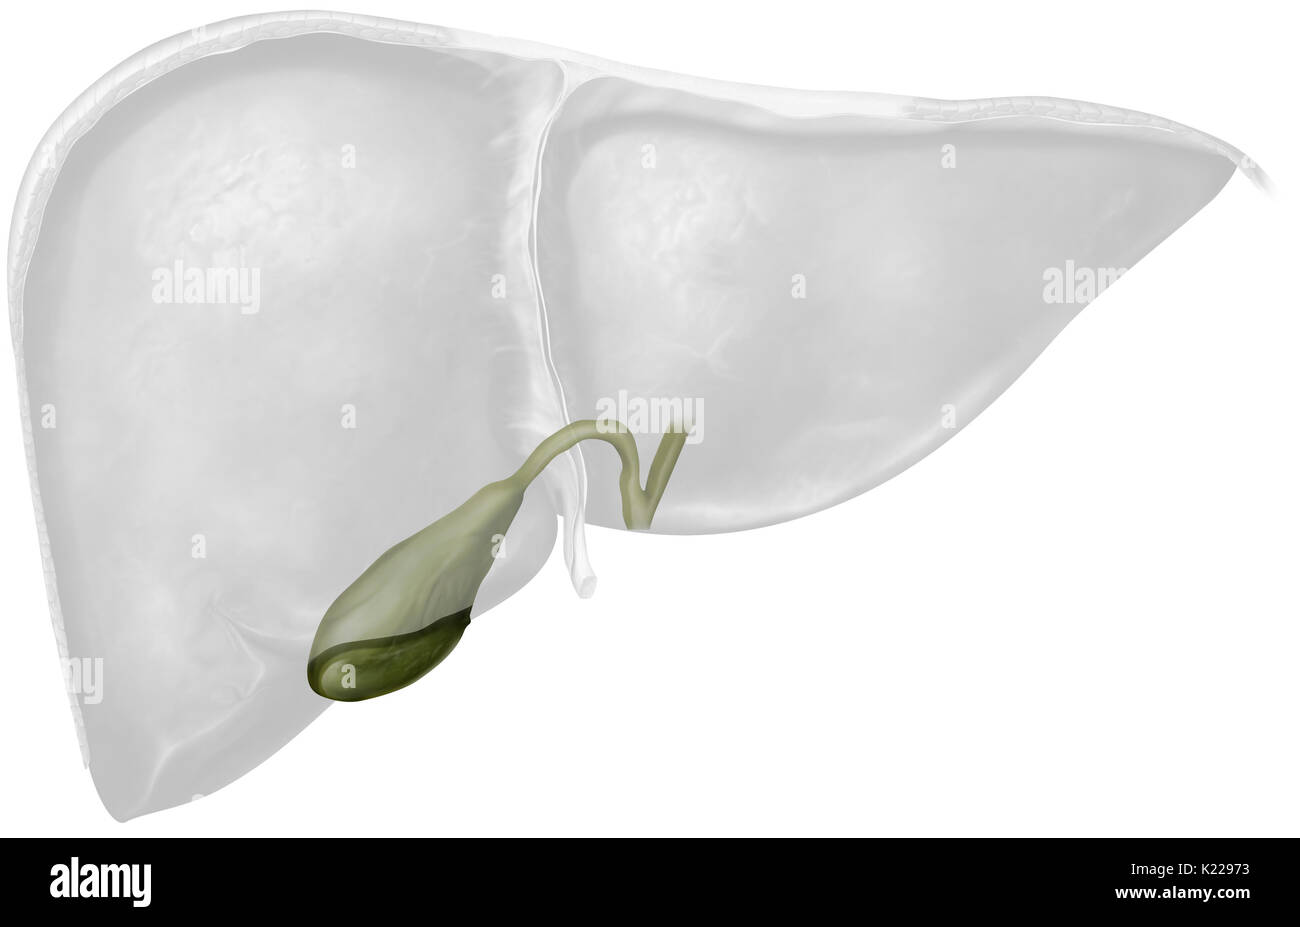 Small muscular sac where bile secreted by the liver is stored before passing into the duodenum. Bile helps in the digestion of fatty substances. Stock Photo